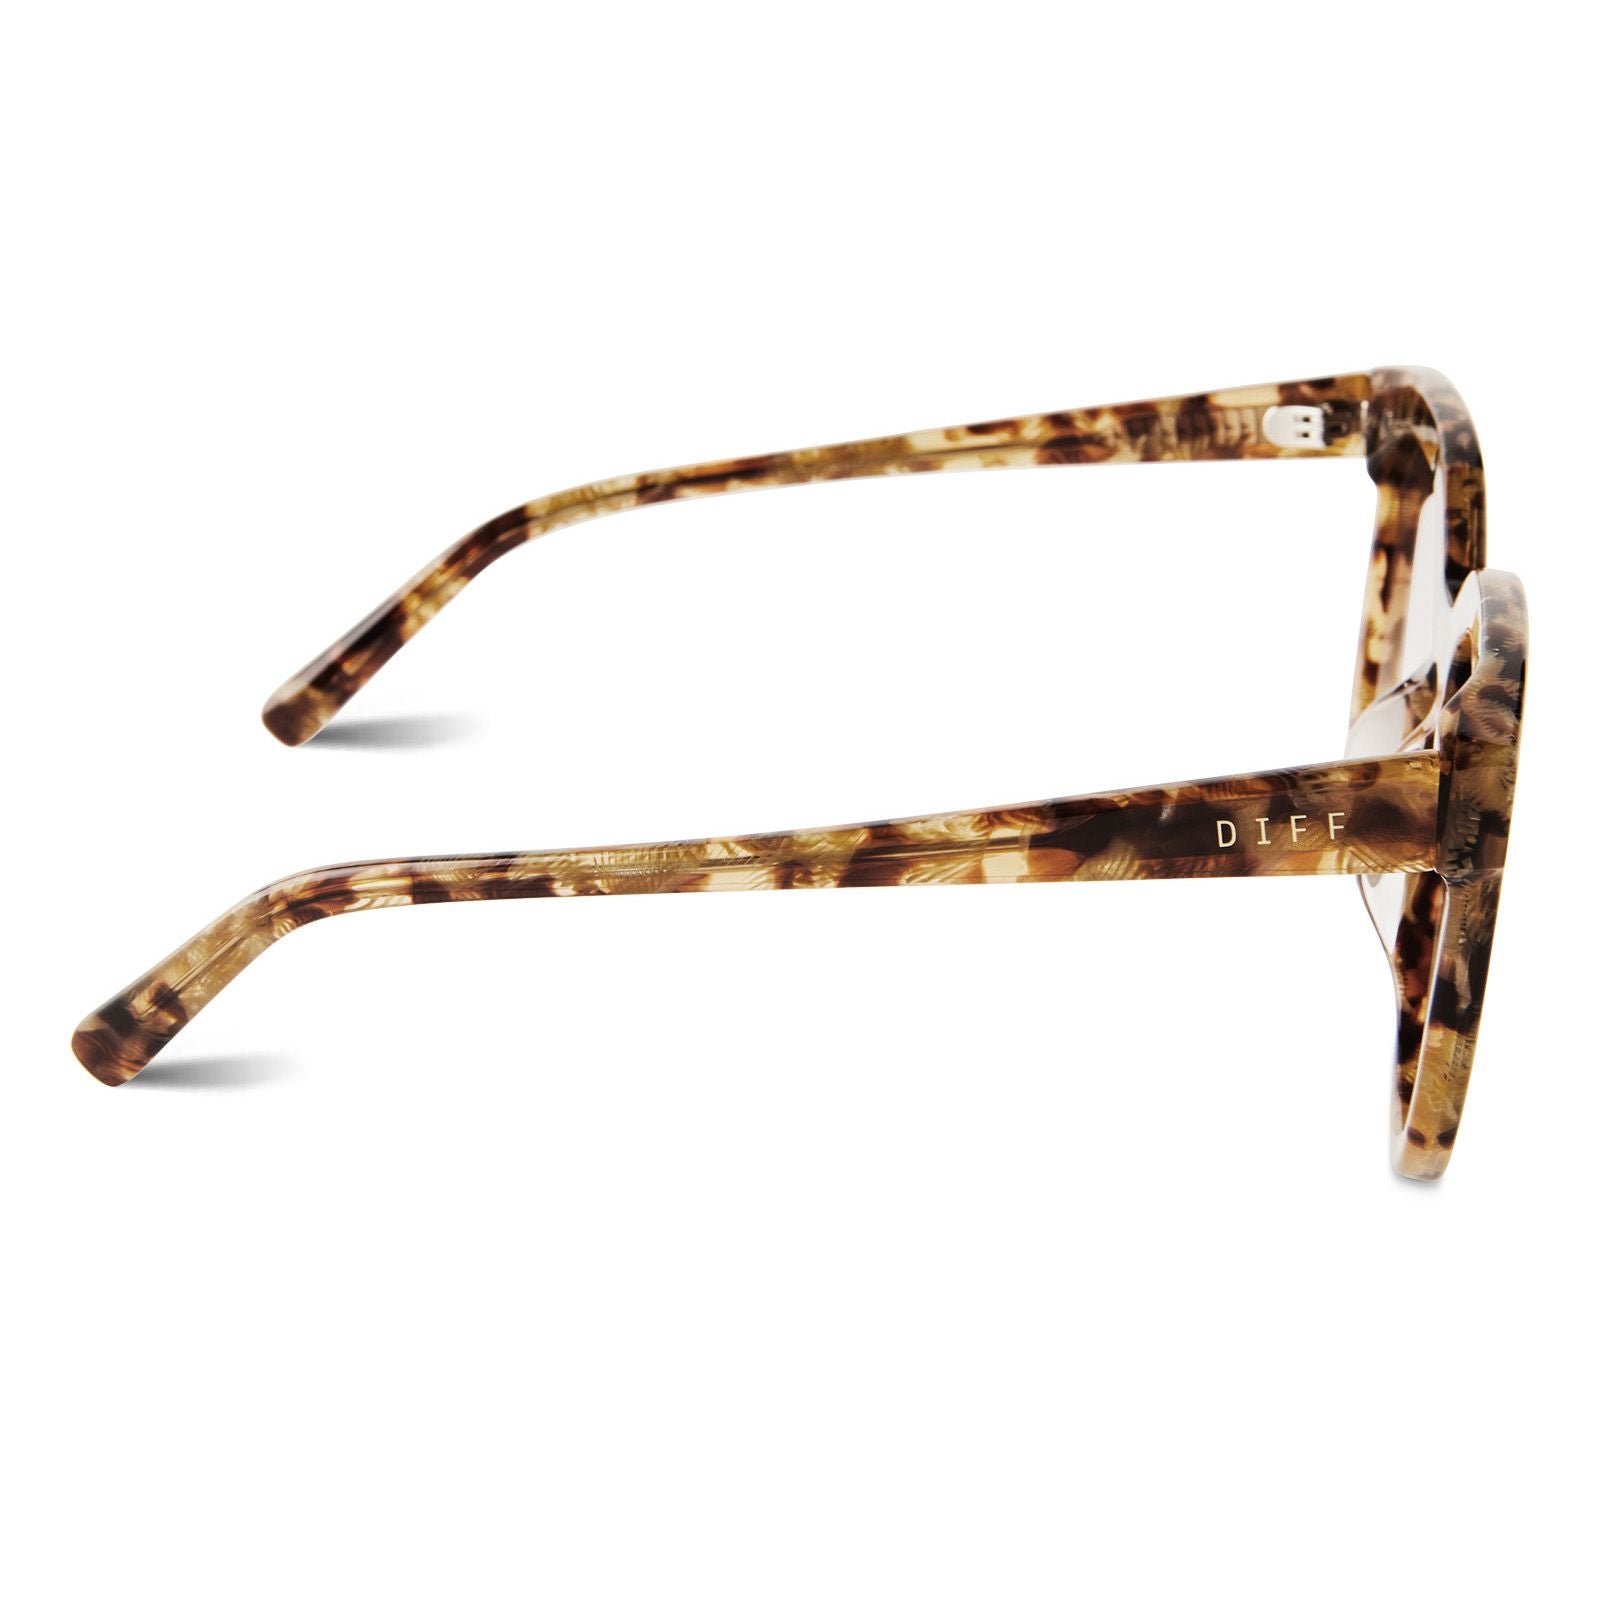 Gia Toasted Coconut Brown Gradient Sunglasses | DIFF